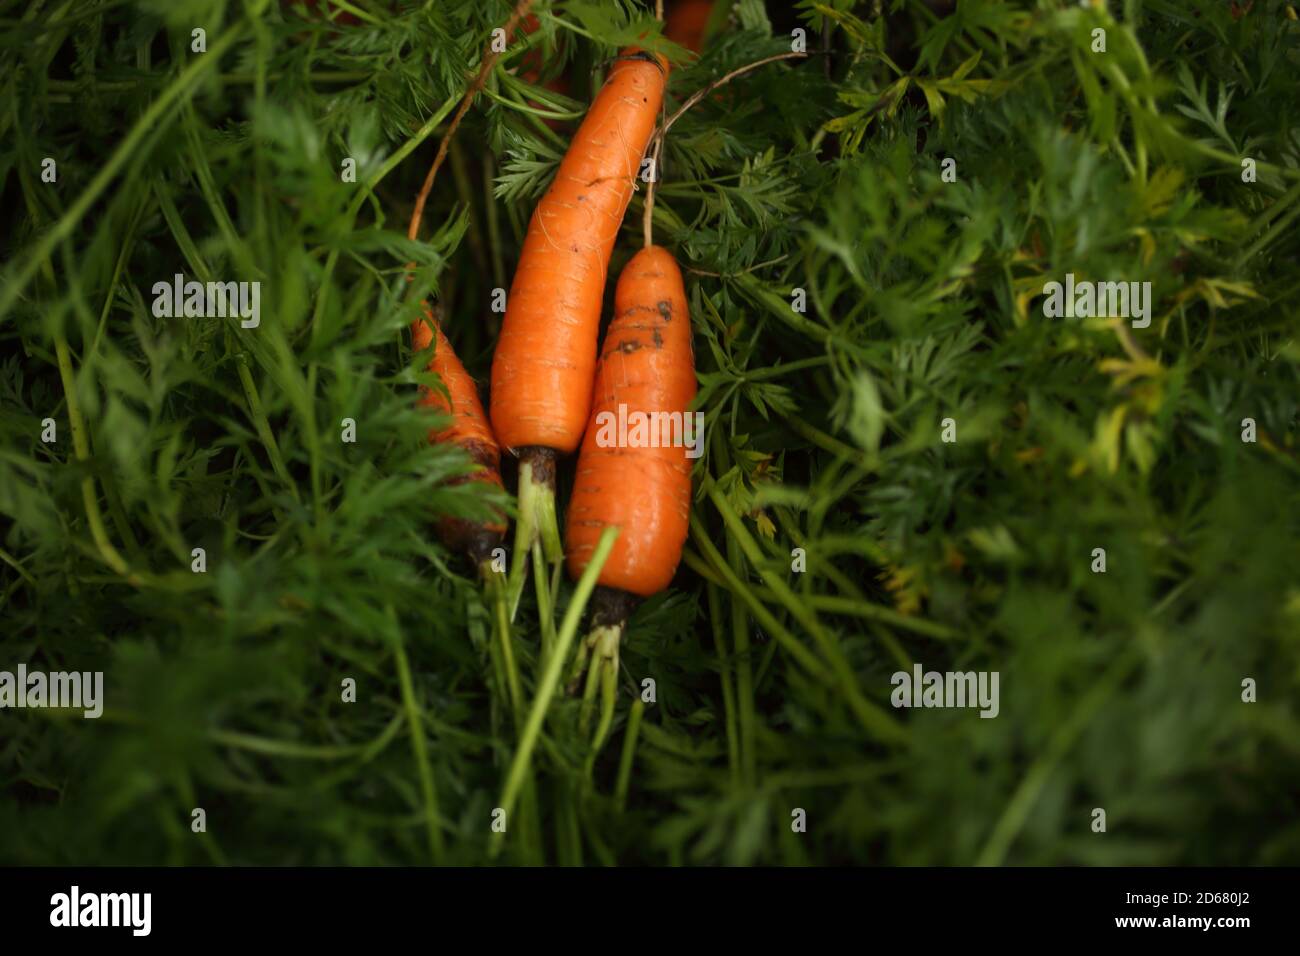 Bunches of colorful orange carrots with green tops held together. Vibrant colors Stock Photo